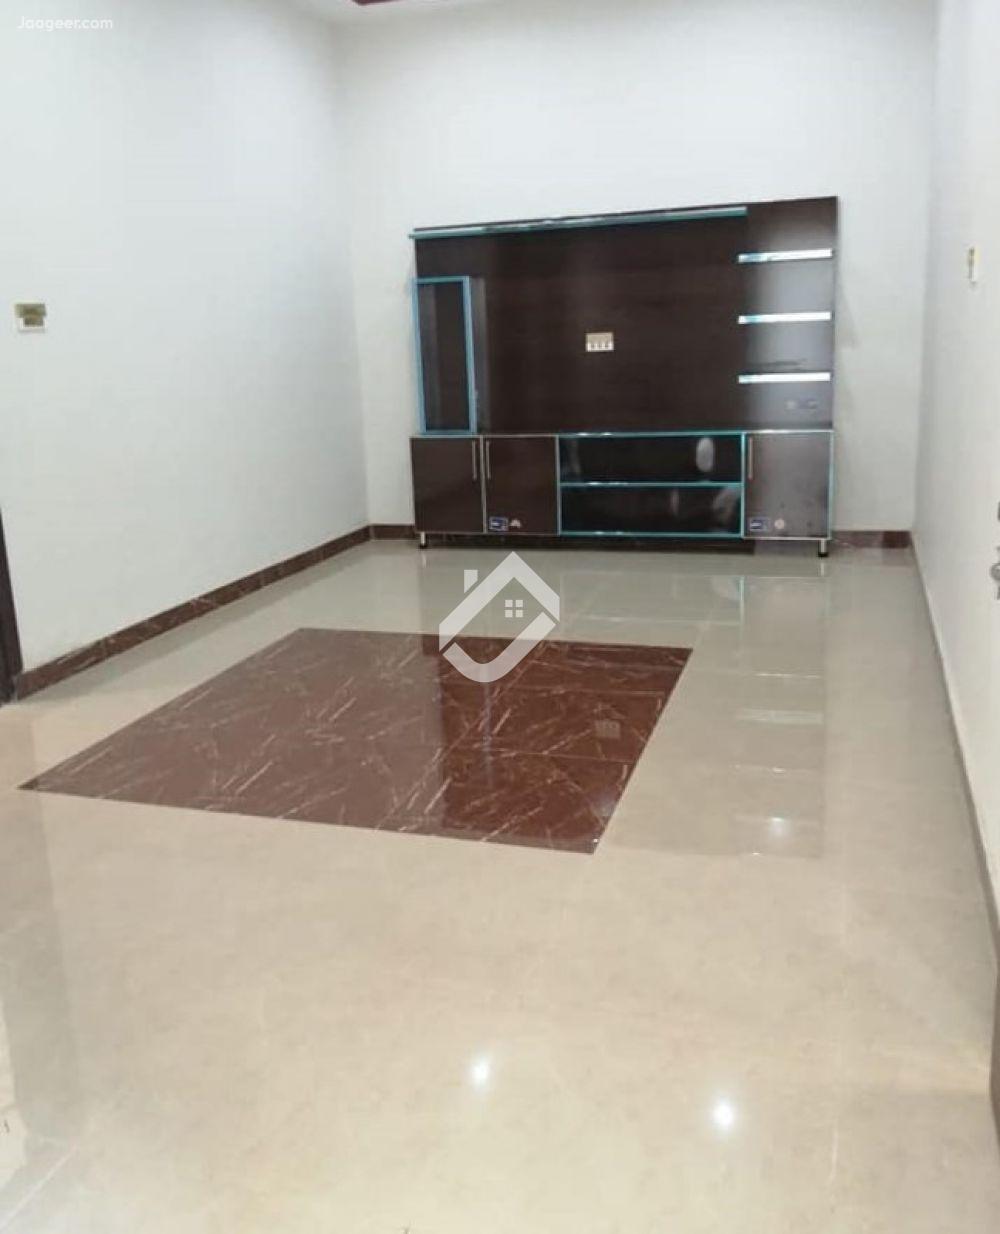 View  4.5 Marla Double Storey House For Sale In National Town in National Town, Sargodha